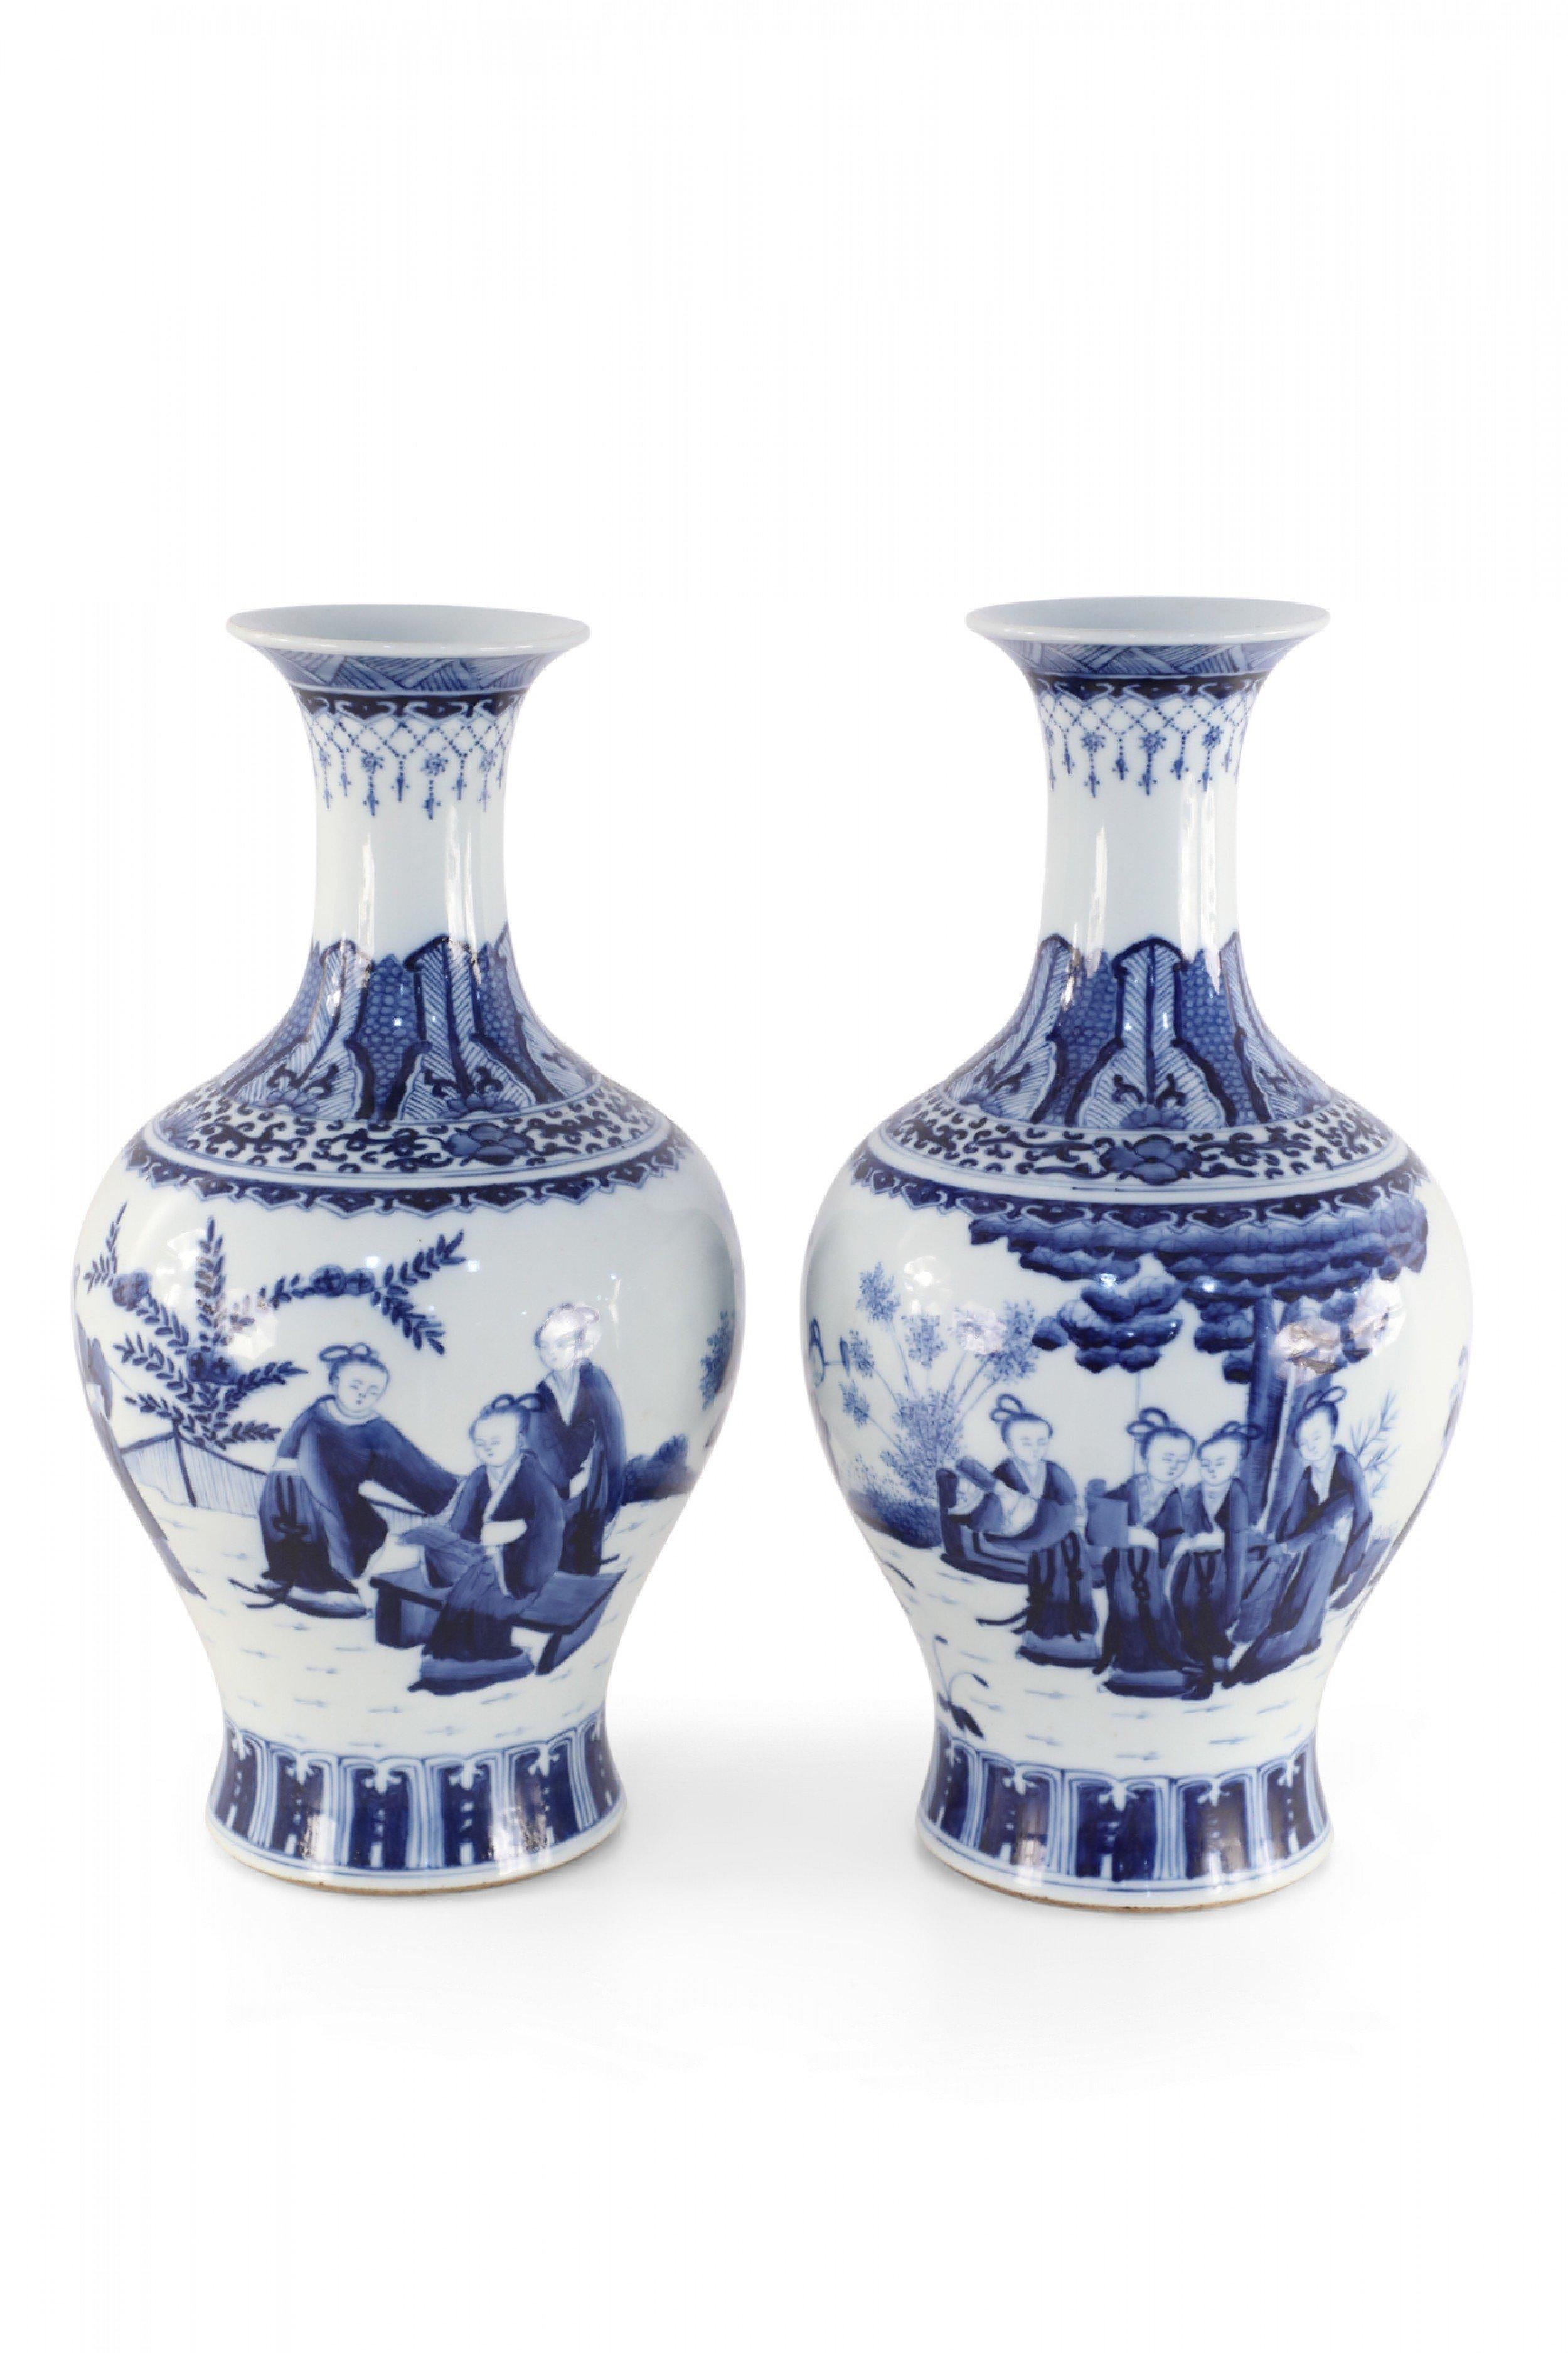 Pair of Chinese Qing Dynasty Kangxi Period (Late 17th to Early 18th Century) white and blue, pear-shaped porcelain vases depicting women in a pastoral setting and decorative patterns along the neck (date mark on bottoms) (Priced as pair).
 